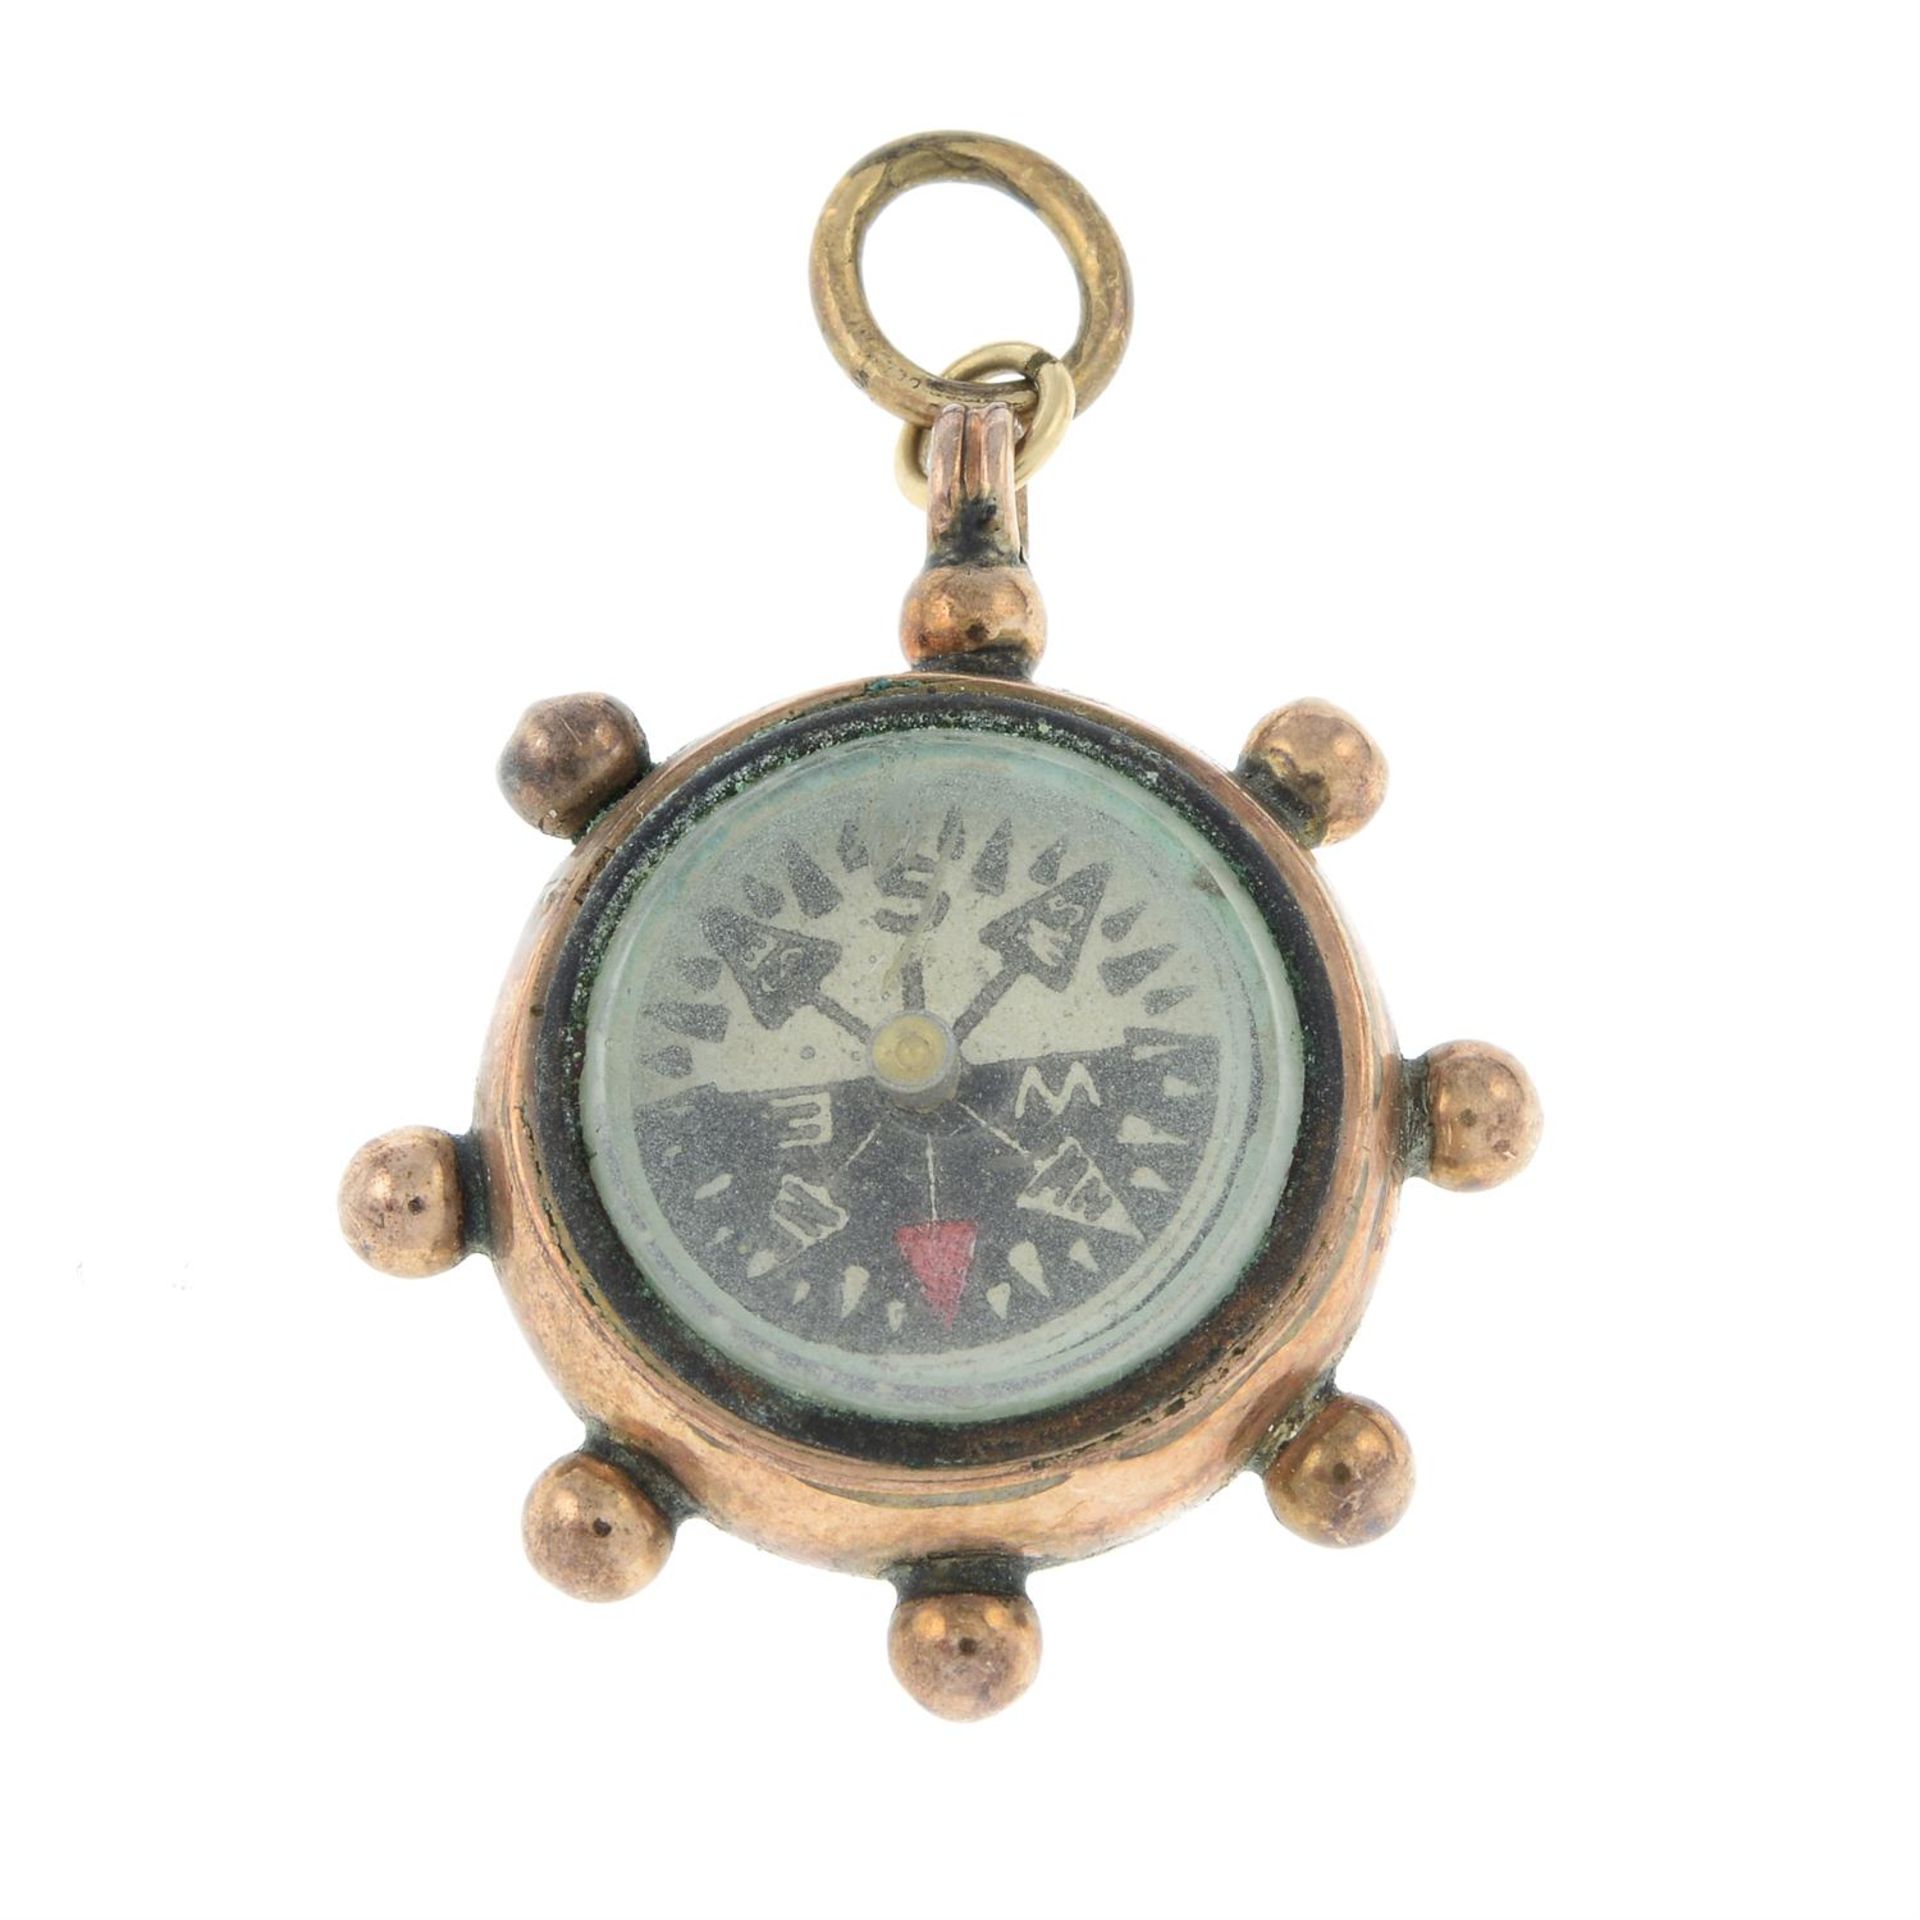 An early to mid 20th century gold bloodstone compass pendant/charm.